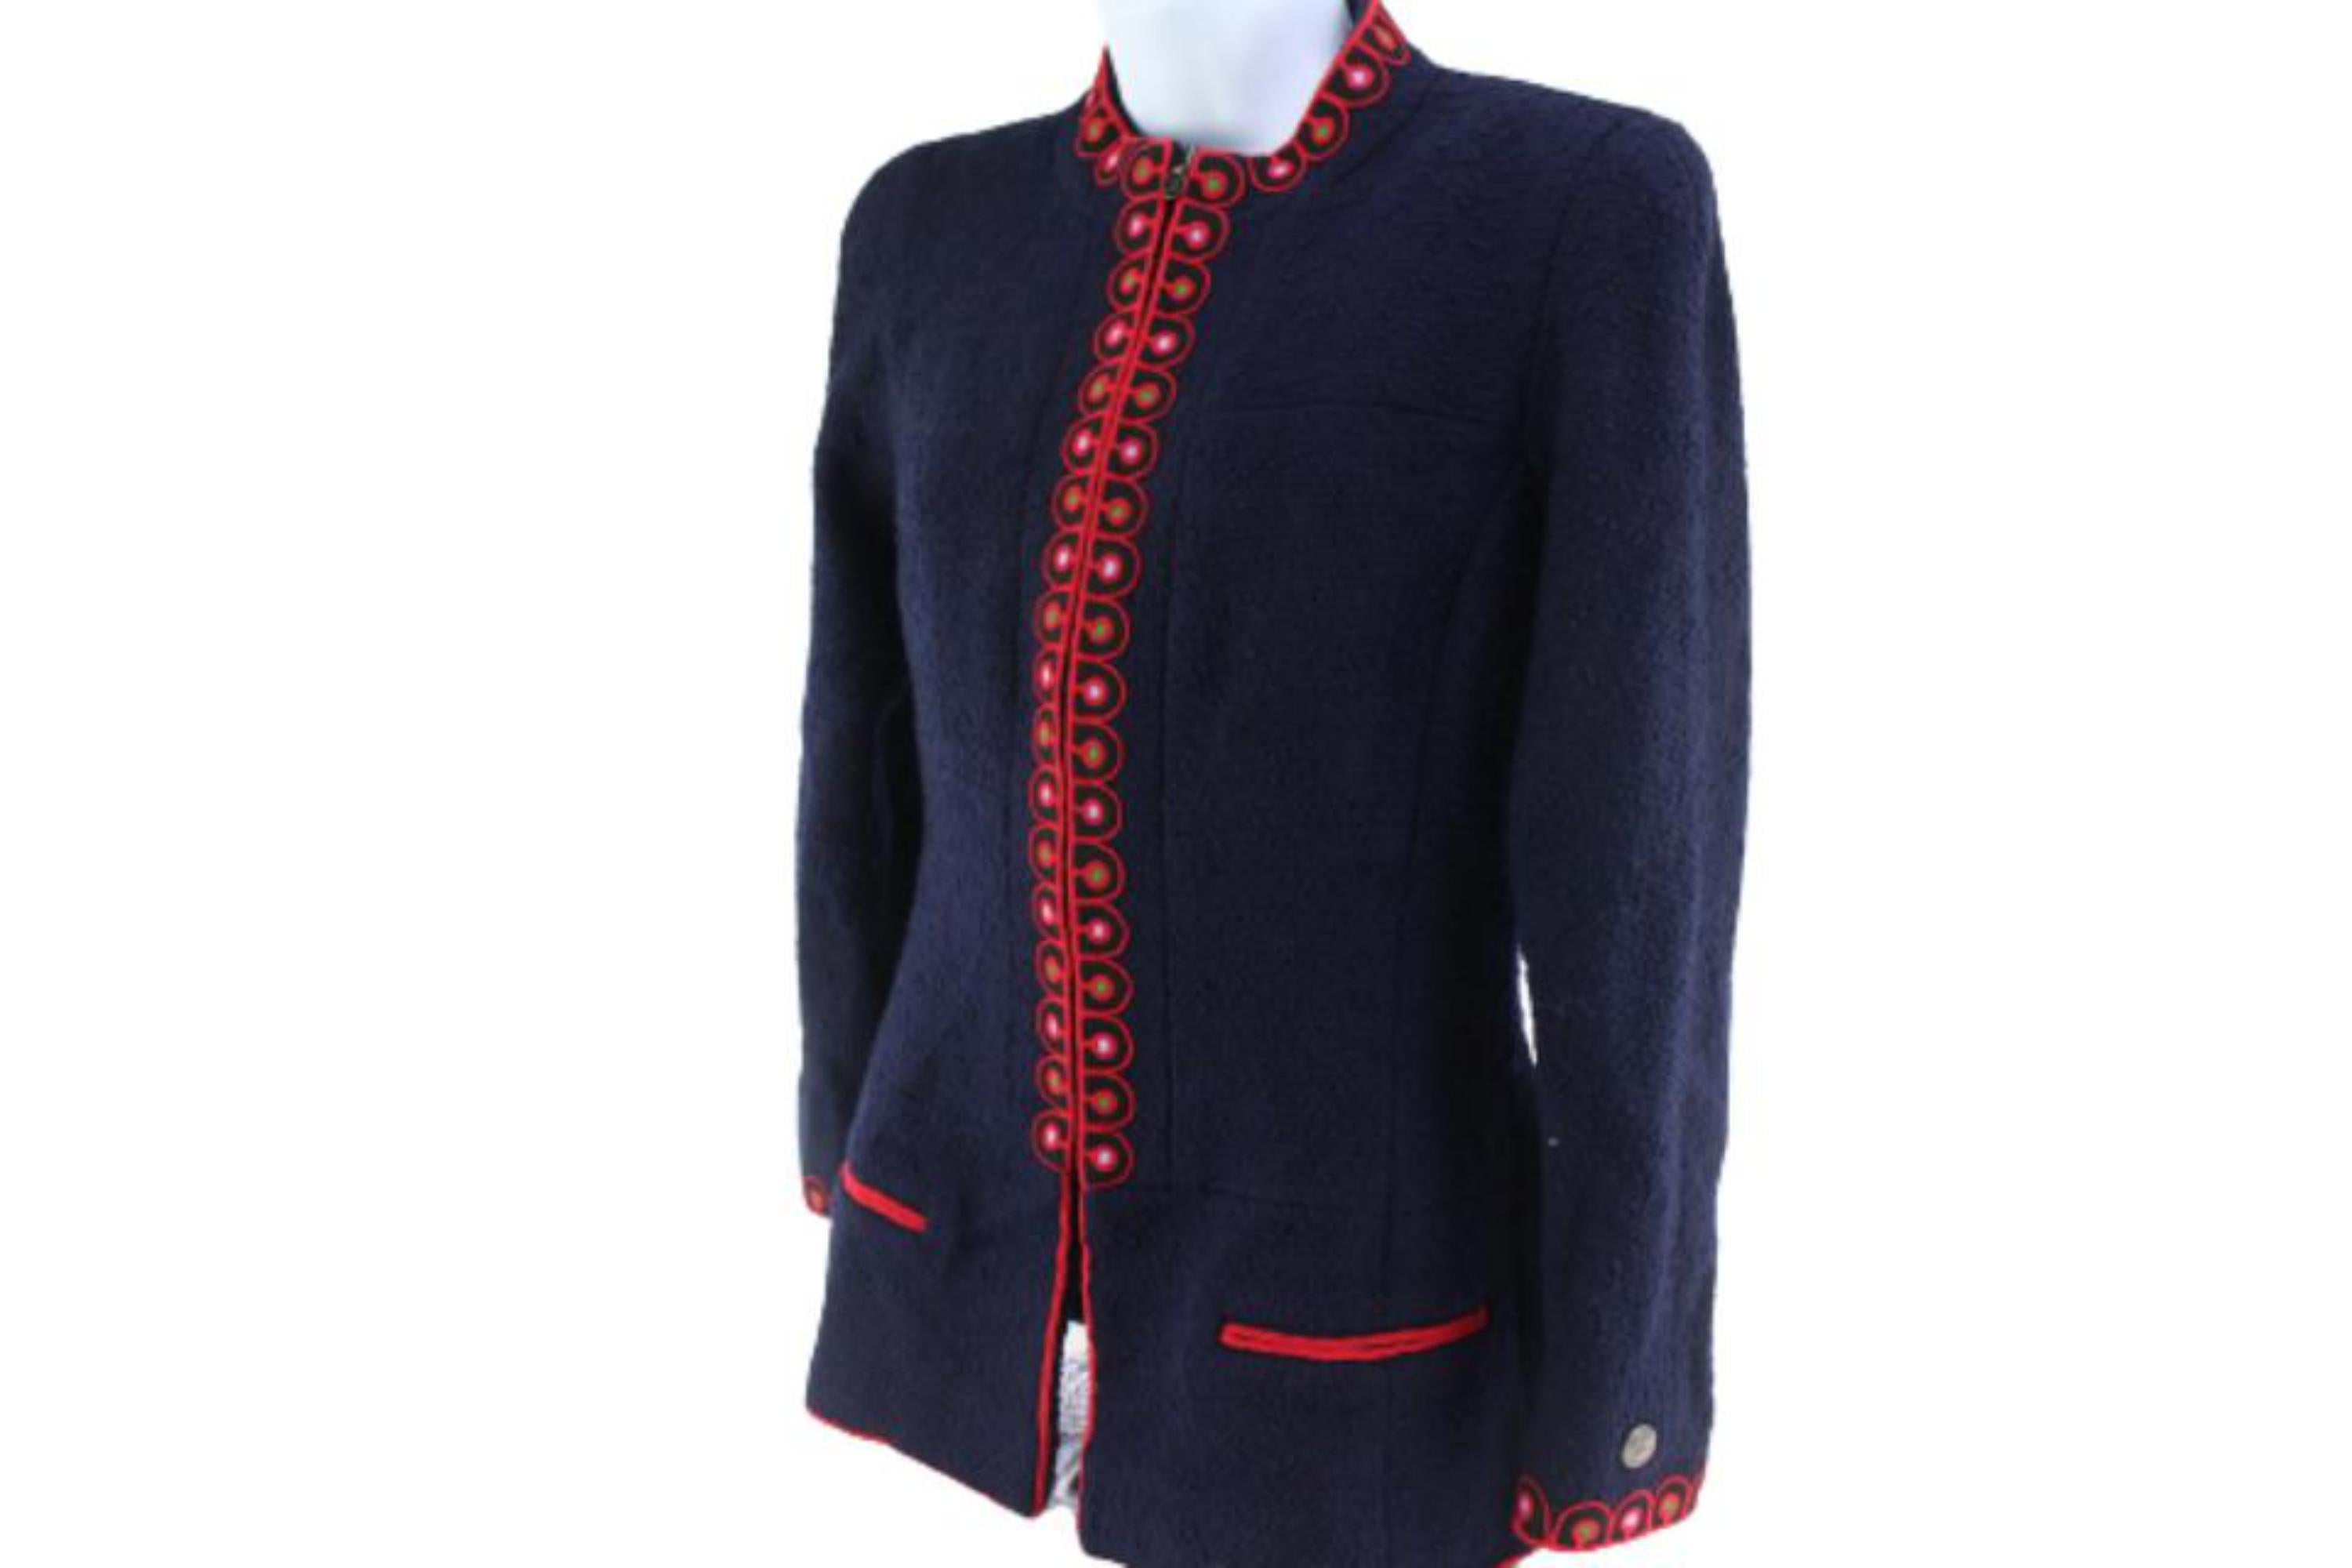 Chanel 97A Size 40 Navy x Red Bouclee Wool Knit Tweed Jacket 1223c8
Made In: France
Measurements: Length:  21